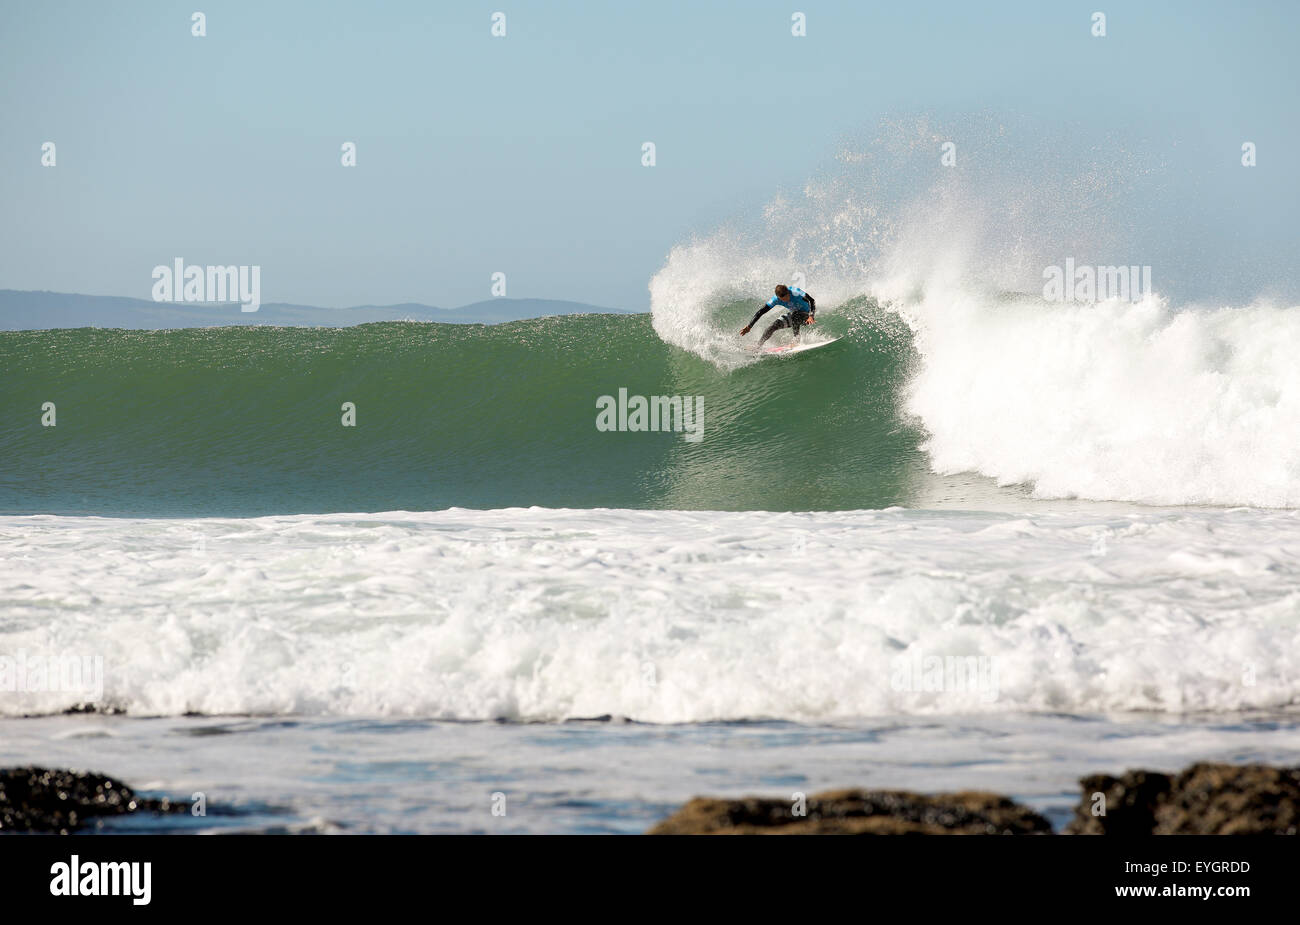 Australian surfer Julian Wilson surfing a wave during the 2015 Jeffreys Bay Open, South Africa Stock Photo